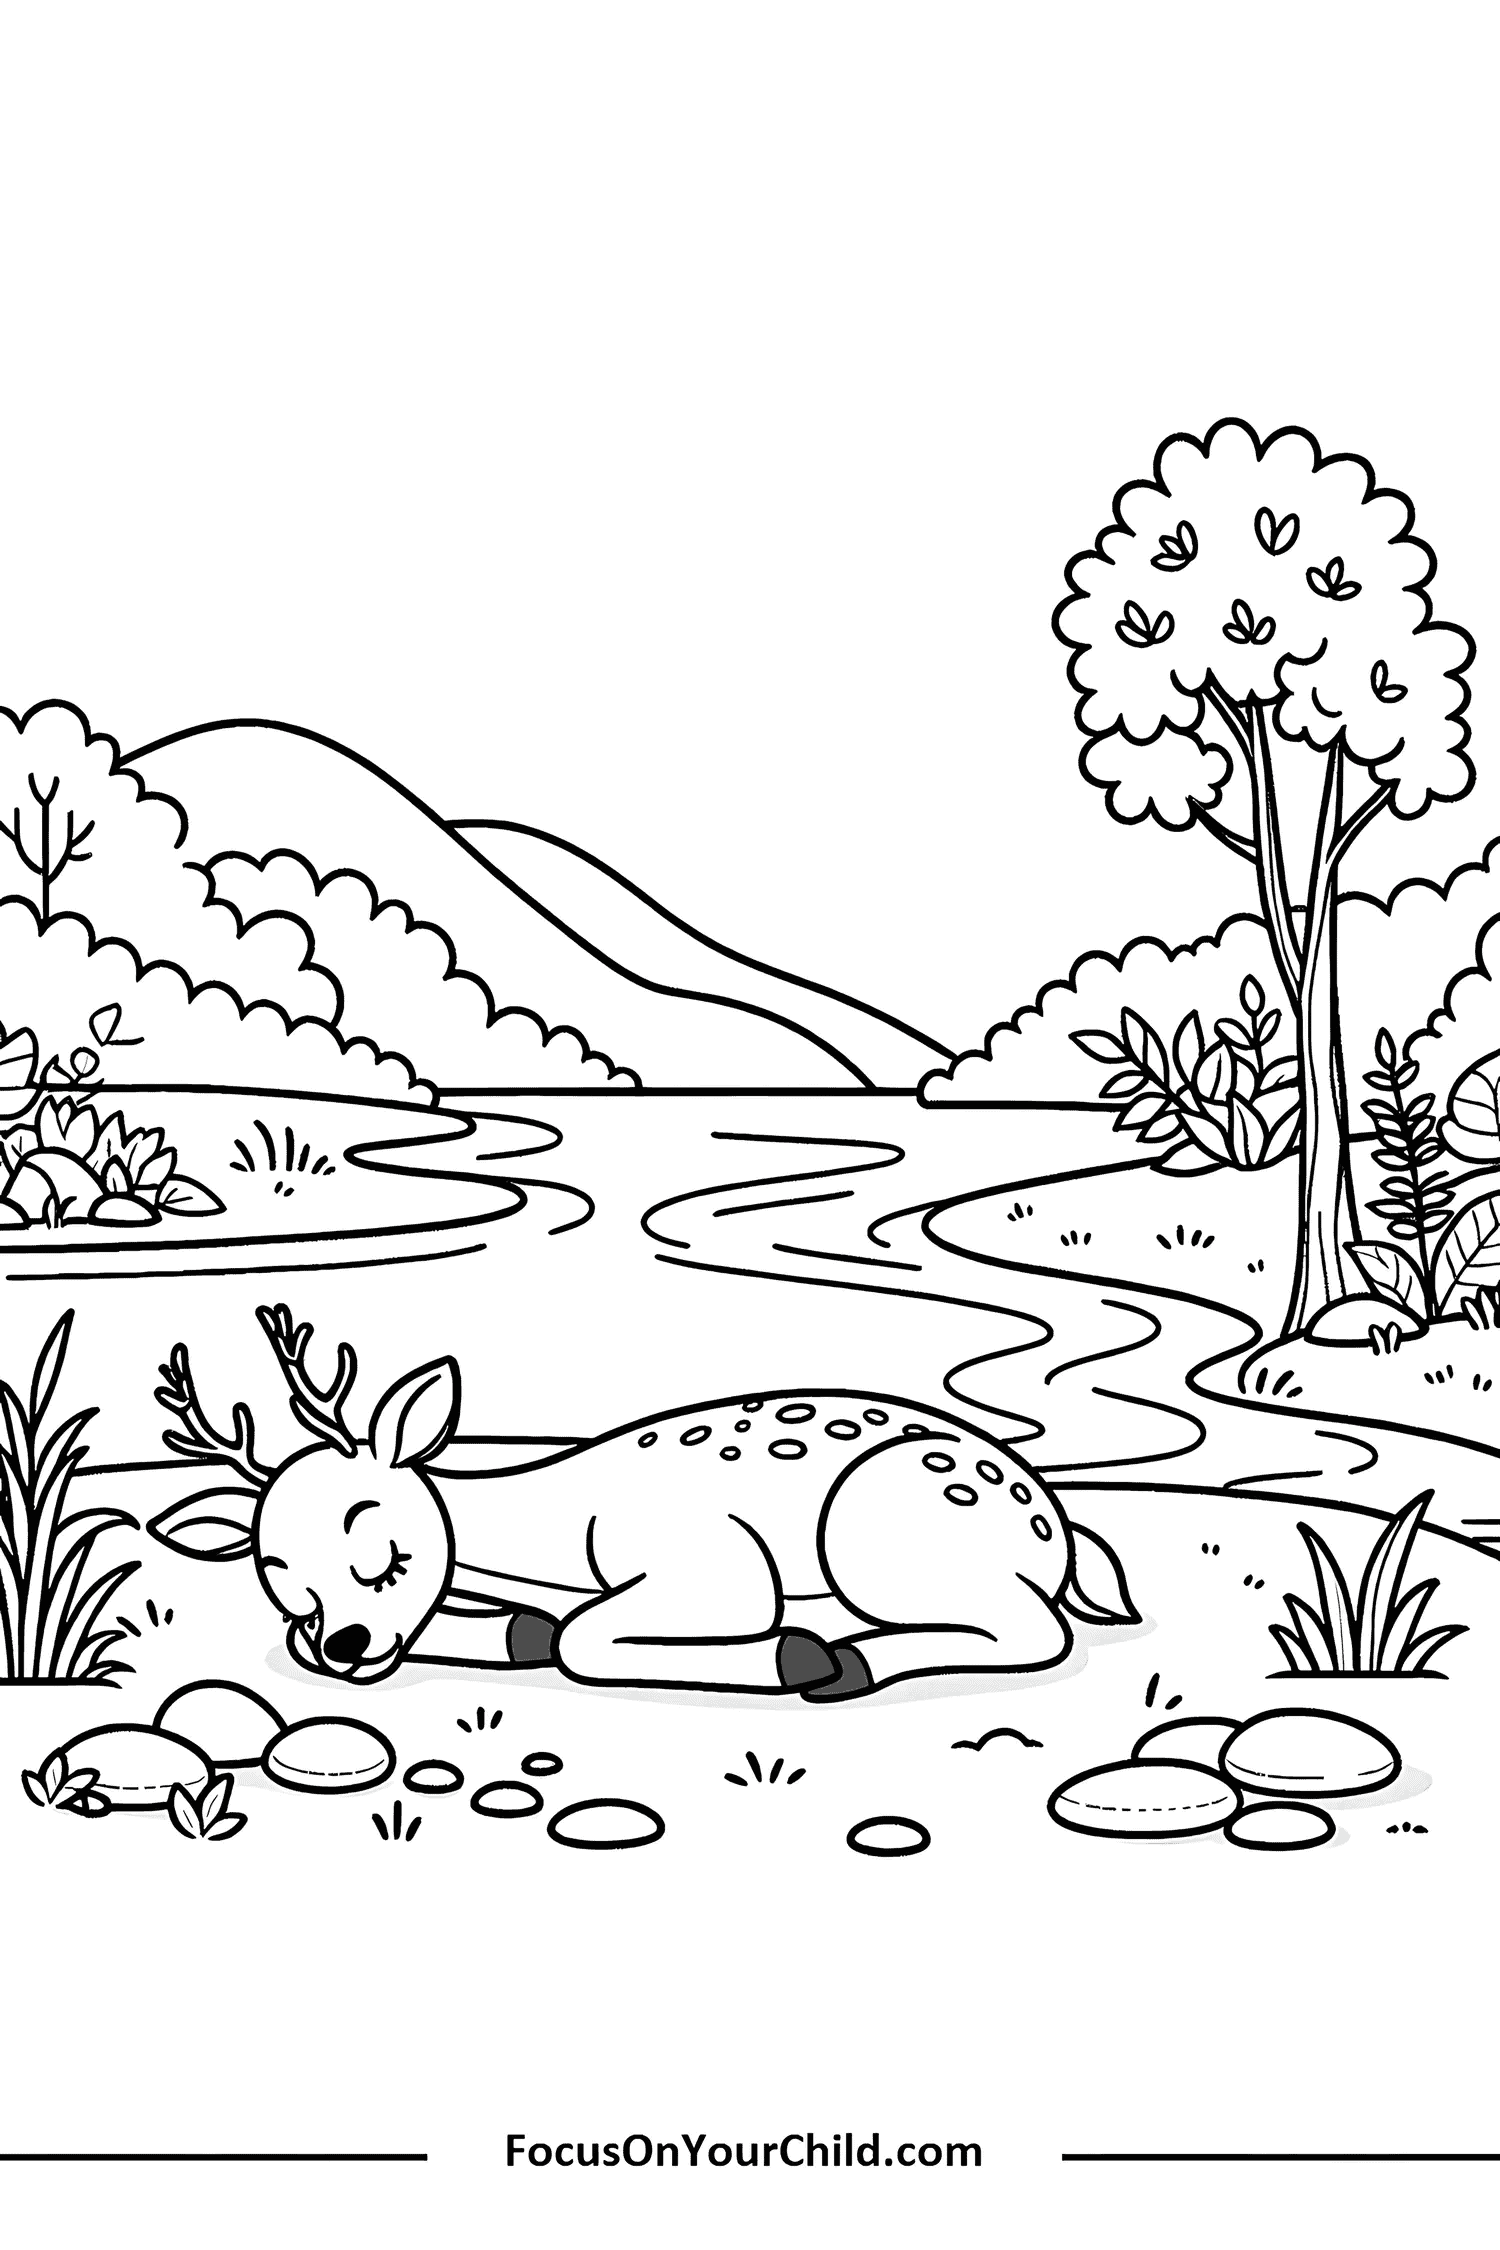 Tranquil deer resting by river in nature coloring page.